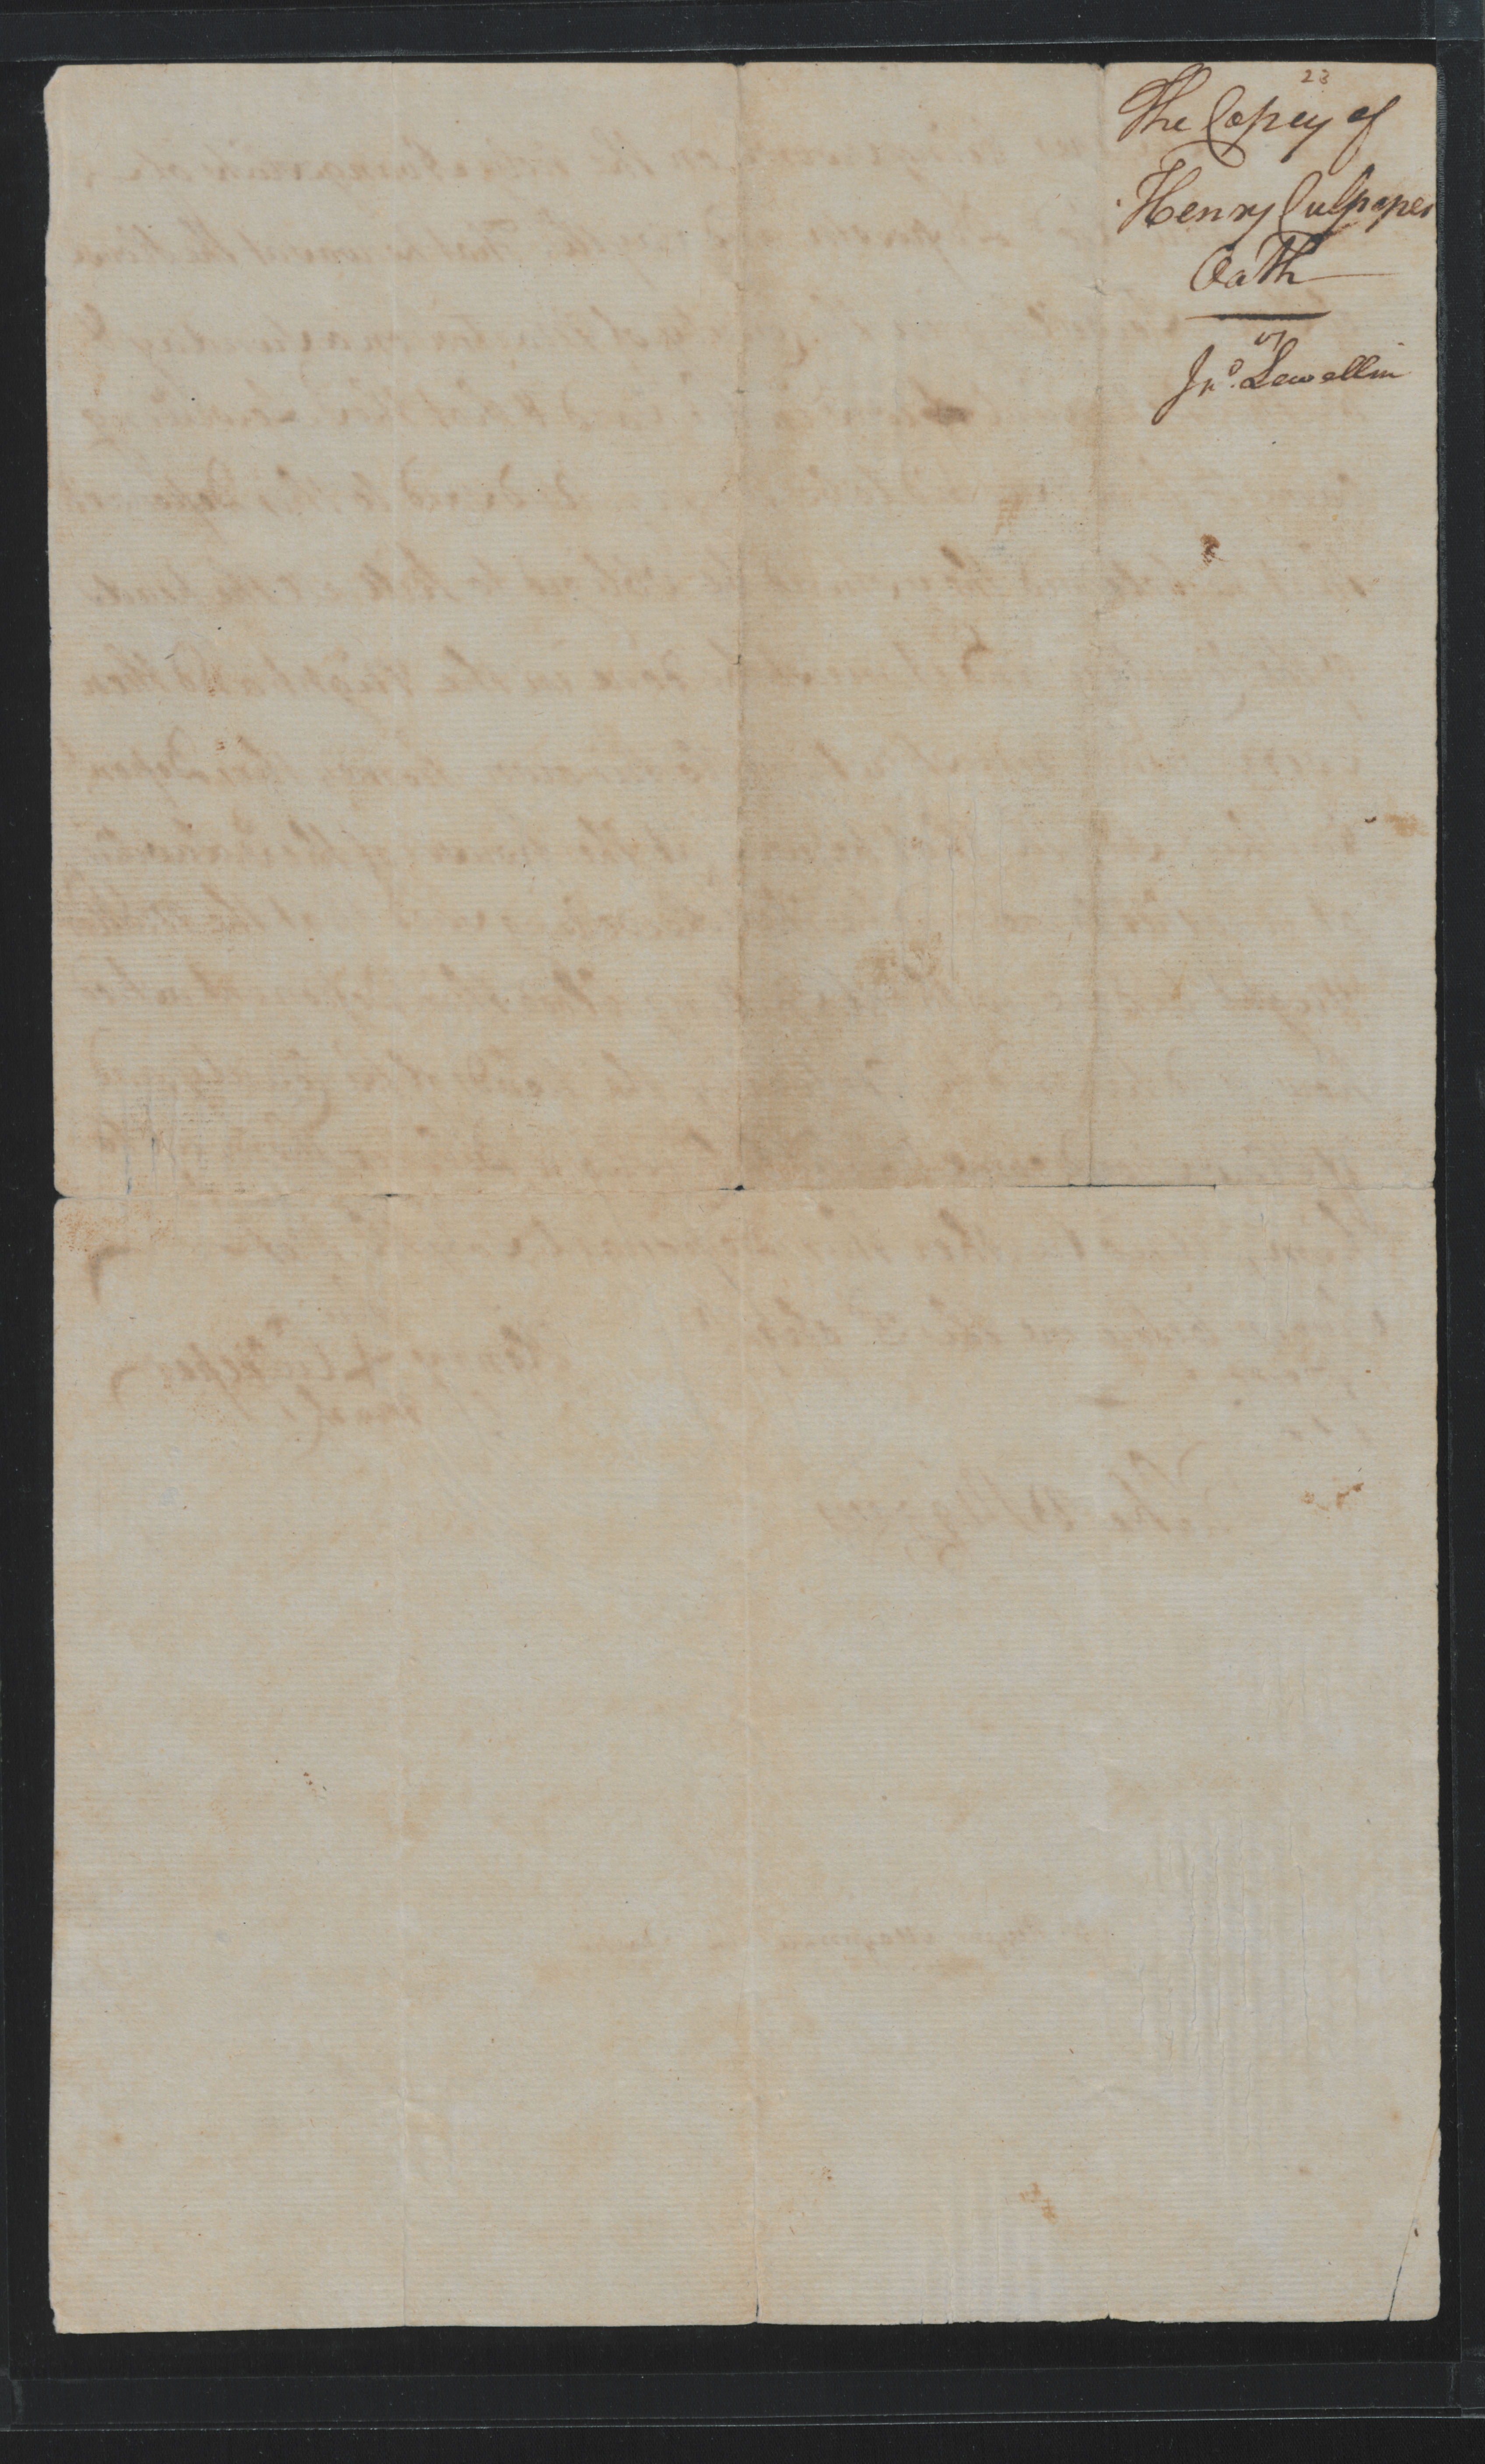 Deposition of Henry Culpeper, 3 September 1777, page 2